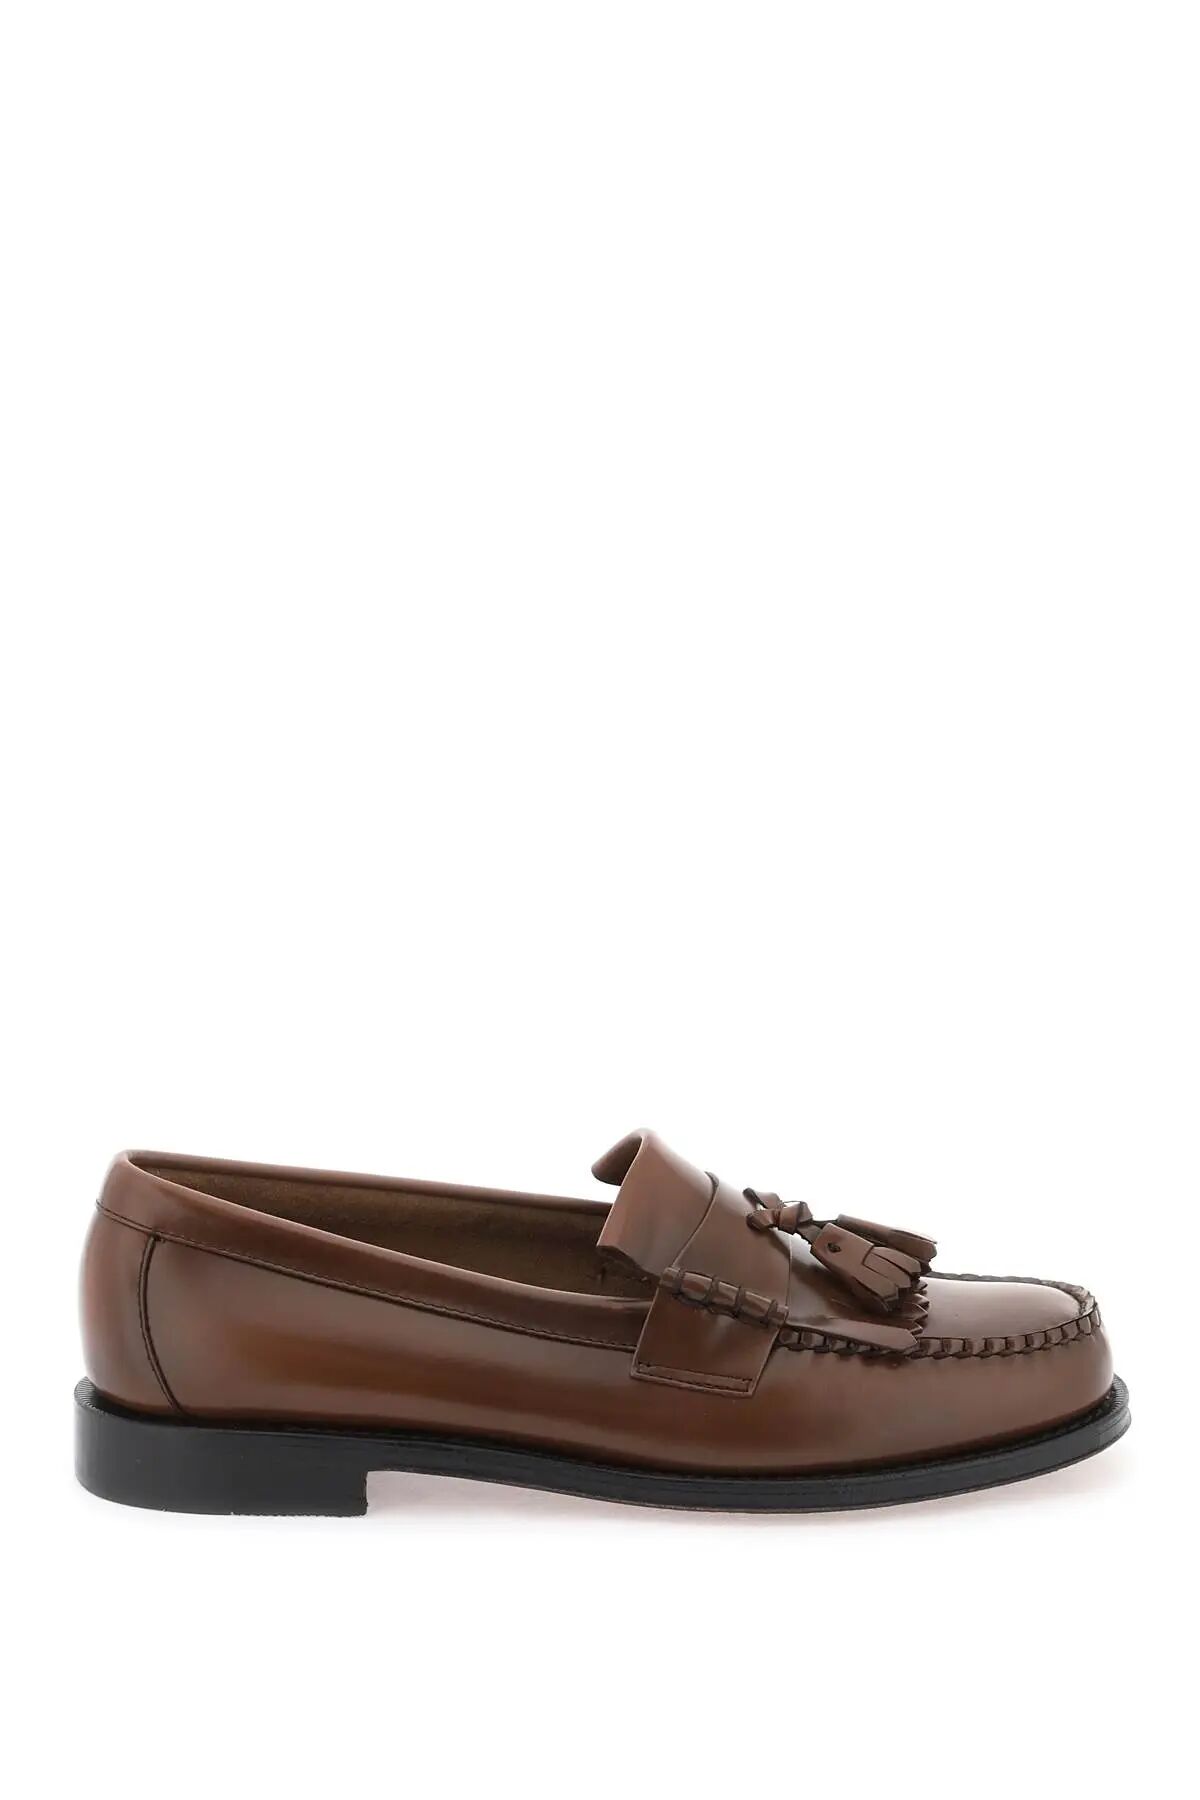 G.H. BASS Esther Kiltie Weejuns loafers  - Brown - male - Size: 43